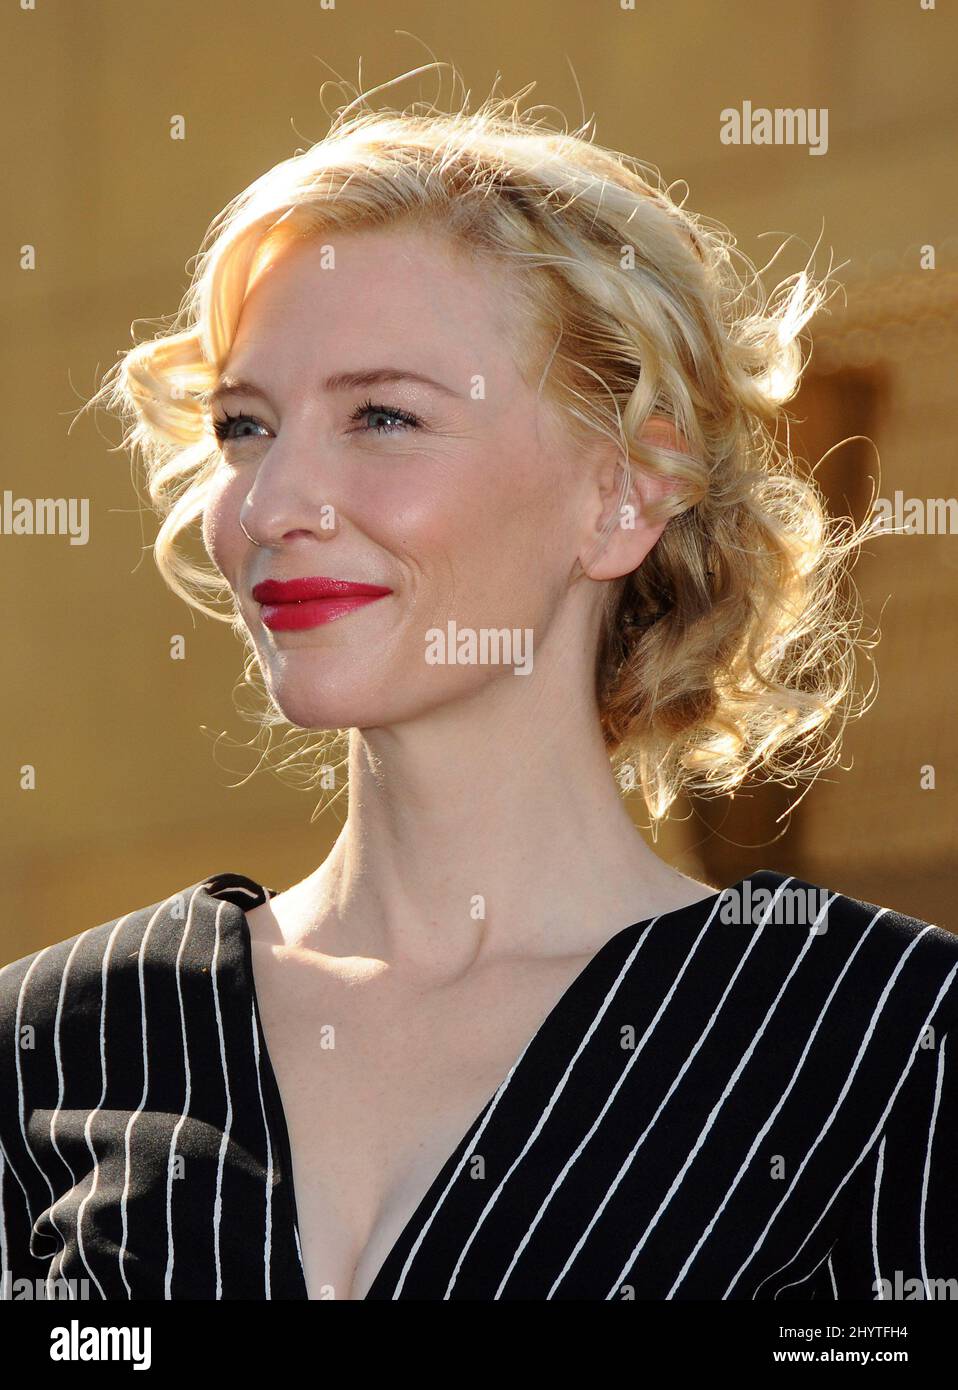 Australian Actress Cate Blanchett Is Honored With The 2376th Star On The Hollywood Walk Of Fame